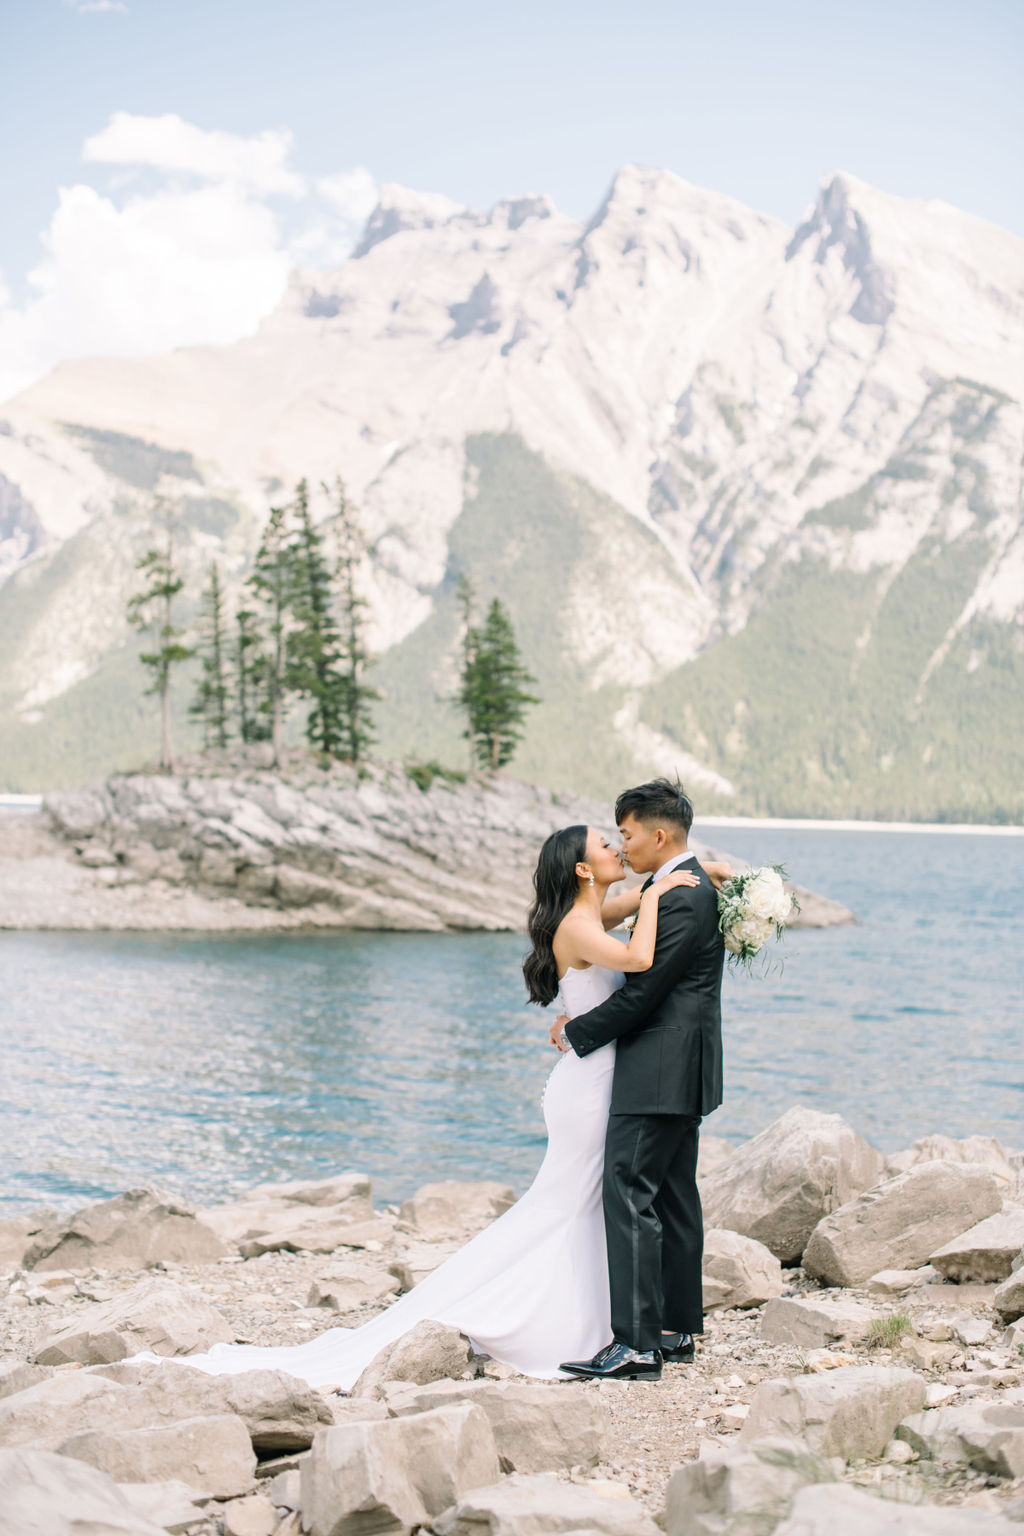 Elegant bride and groom embracing in the mountains of Banff, Alberta with lake in the background. Canadian summer mountain wedding inspiration. Sophisticated mountain bridal portraits by Corrina Walker Photography. 